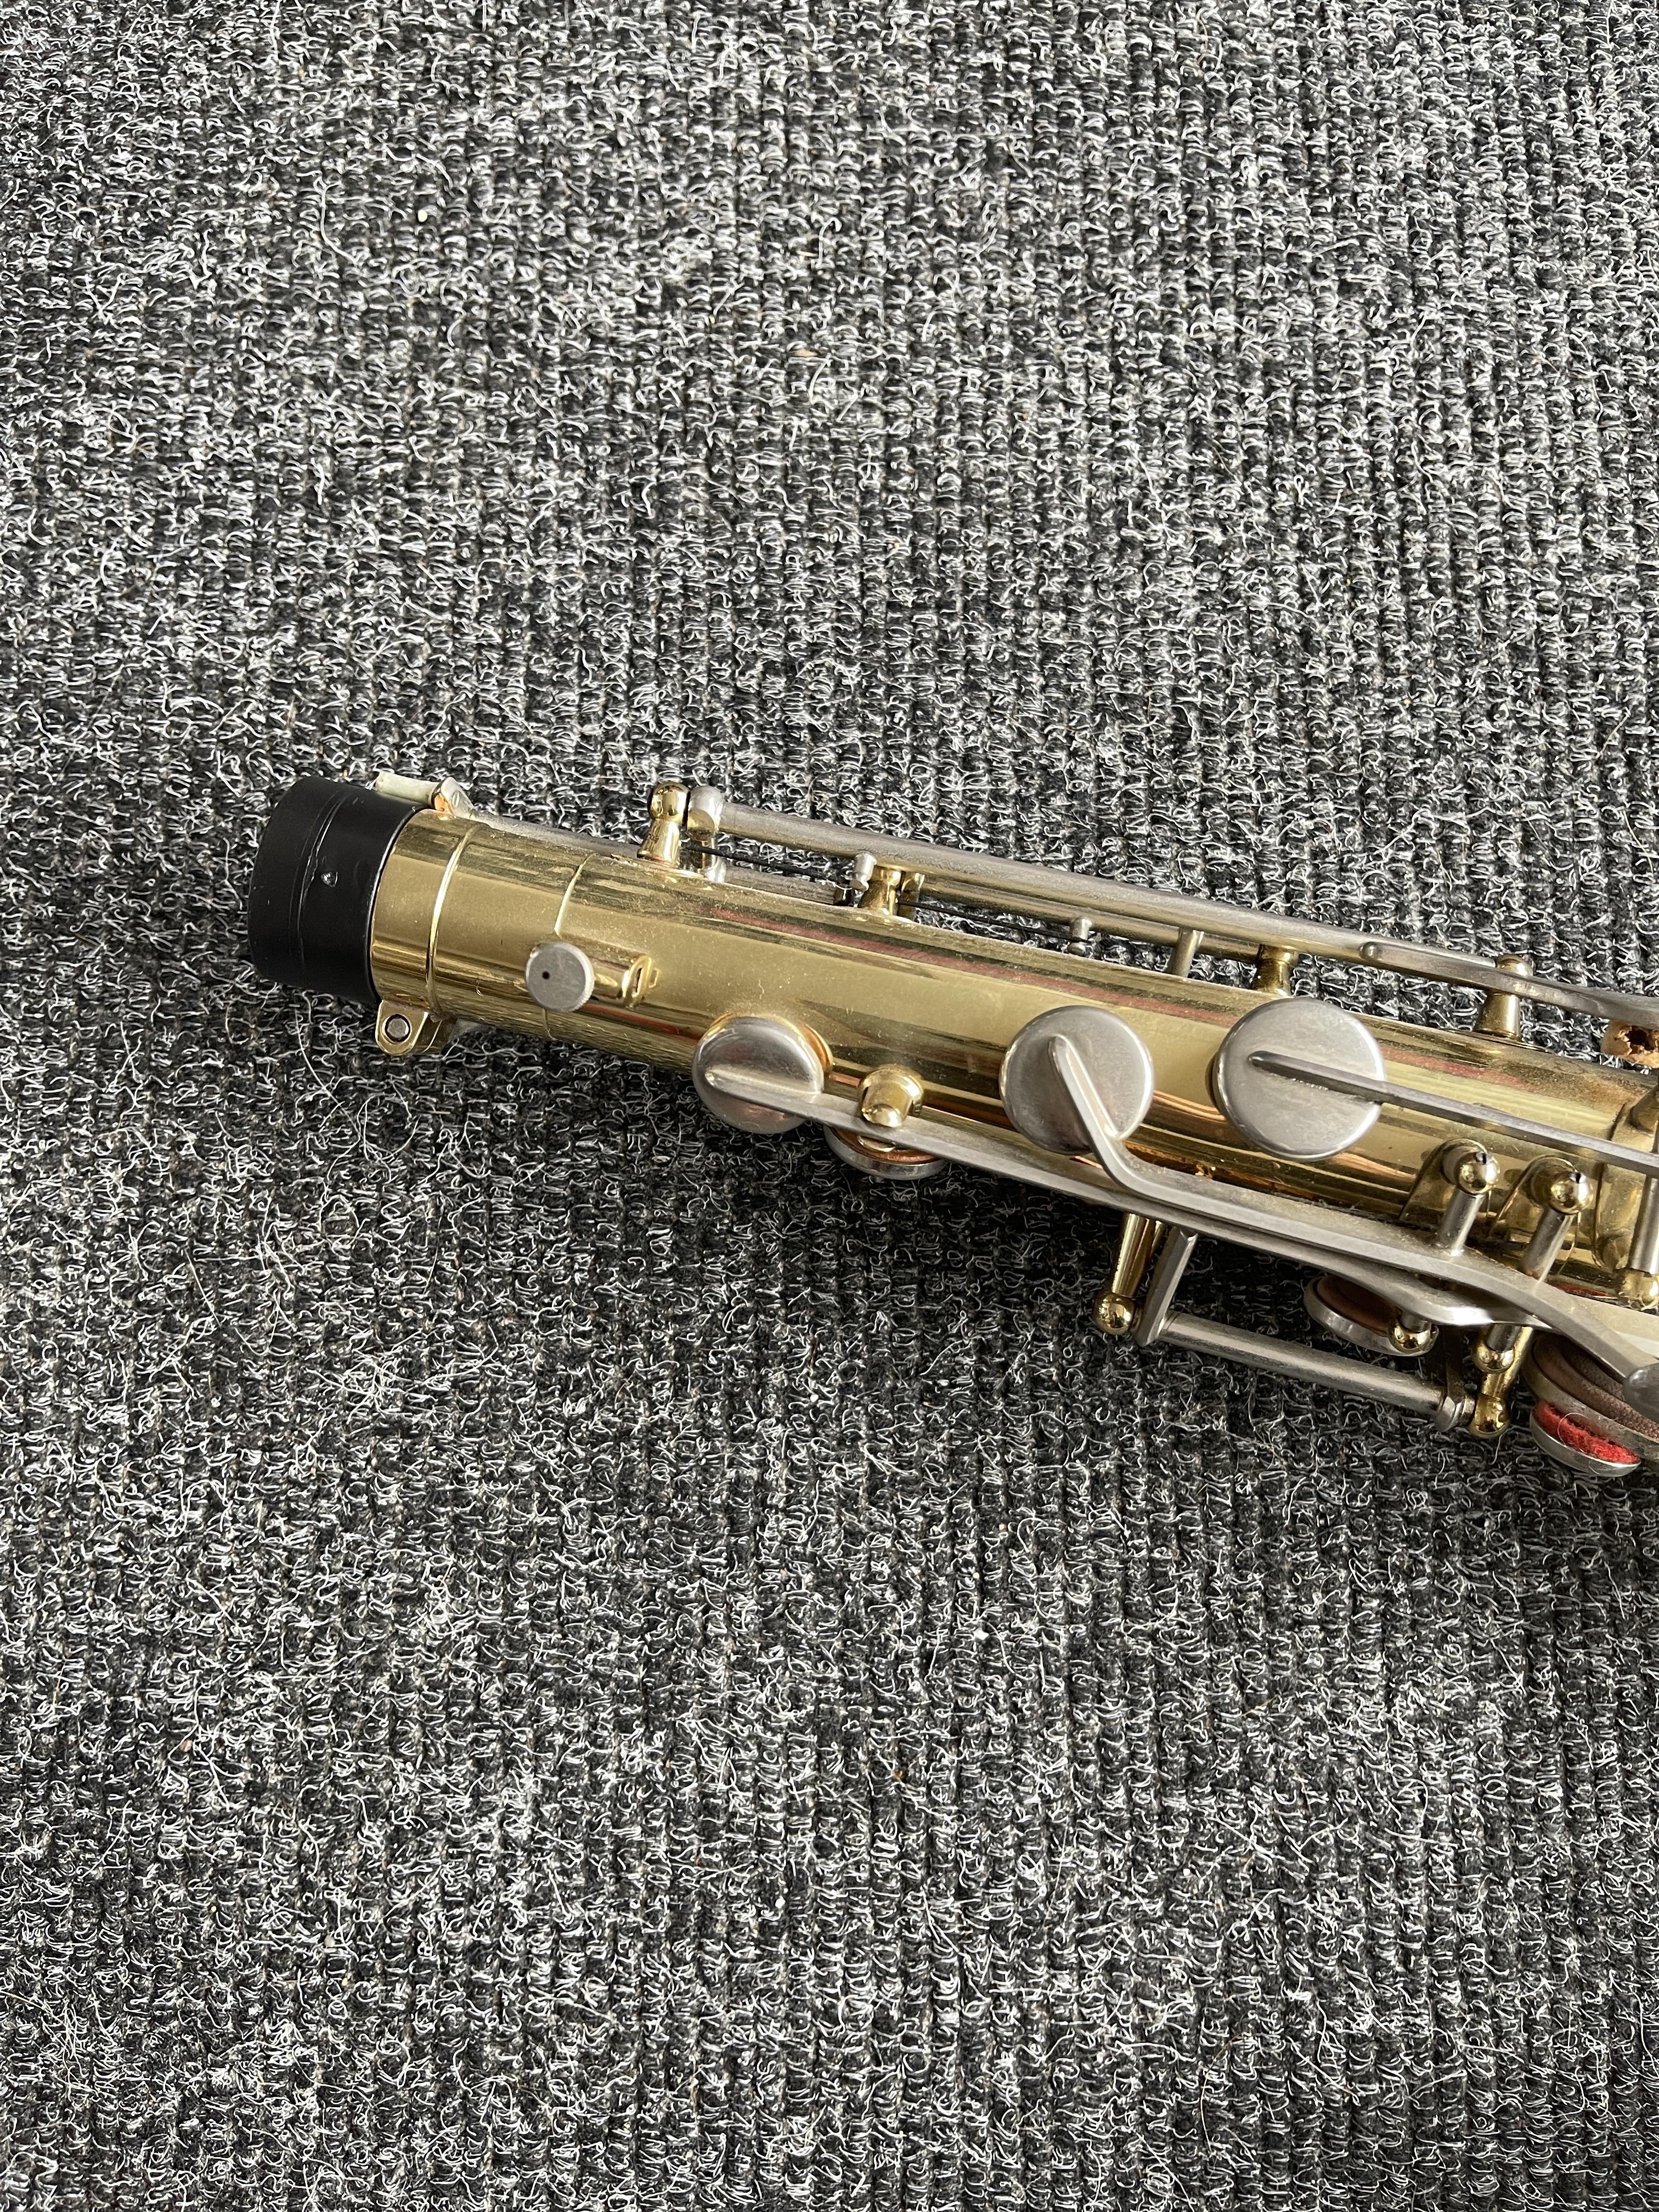 B&H 400 made for Boosey & Hawkes Cased Saxophone. - Image 12 of 31